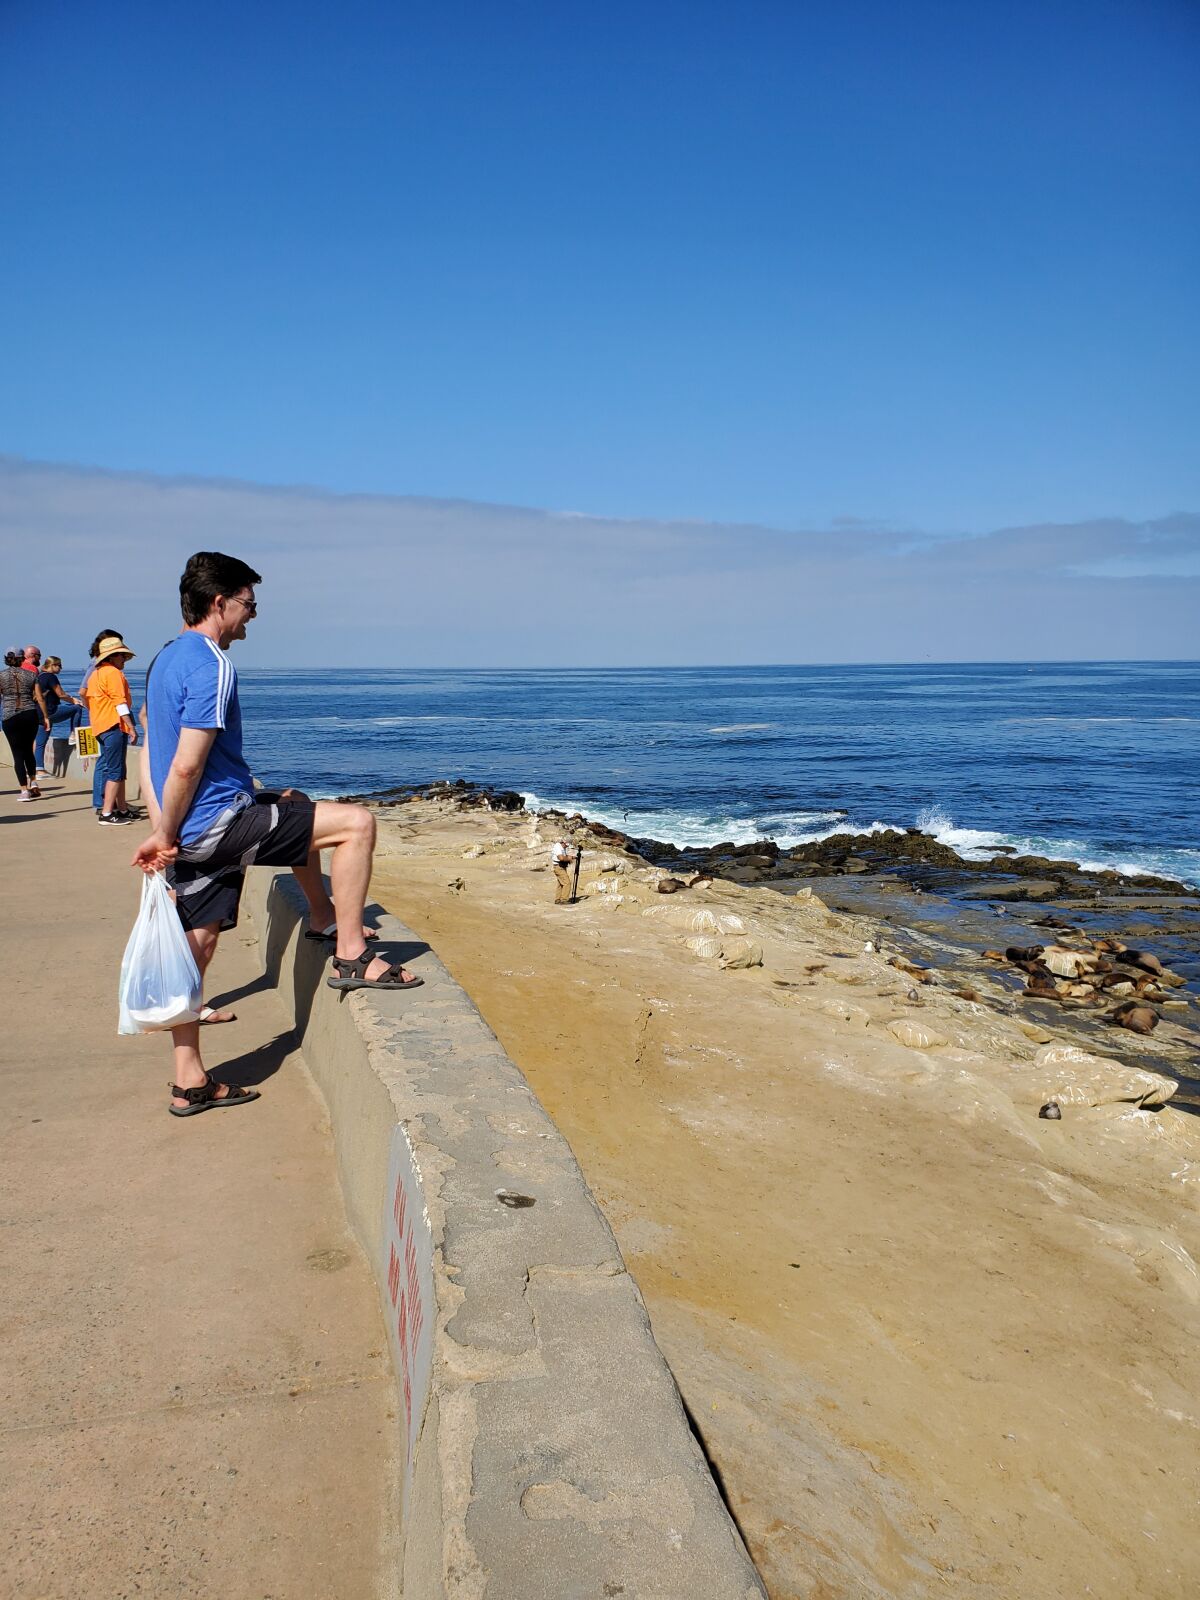 Visitors to Point La Jolla view the sea lions from behind the short wall that separates the sidewalk from the bluffs.